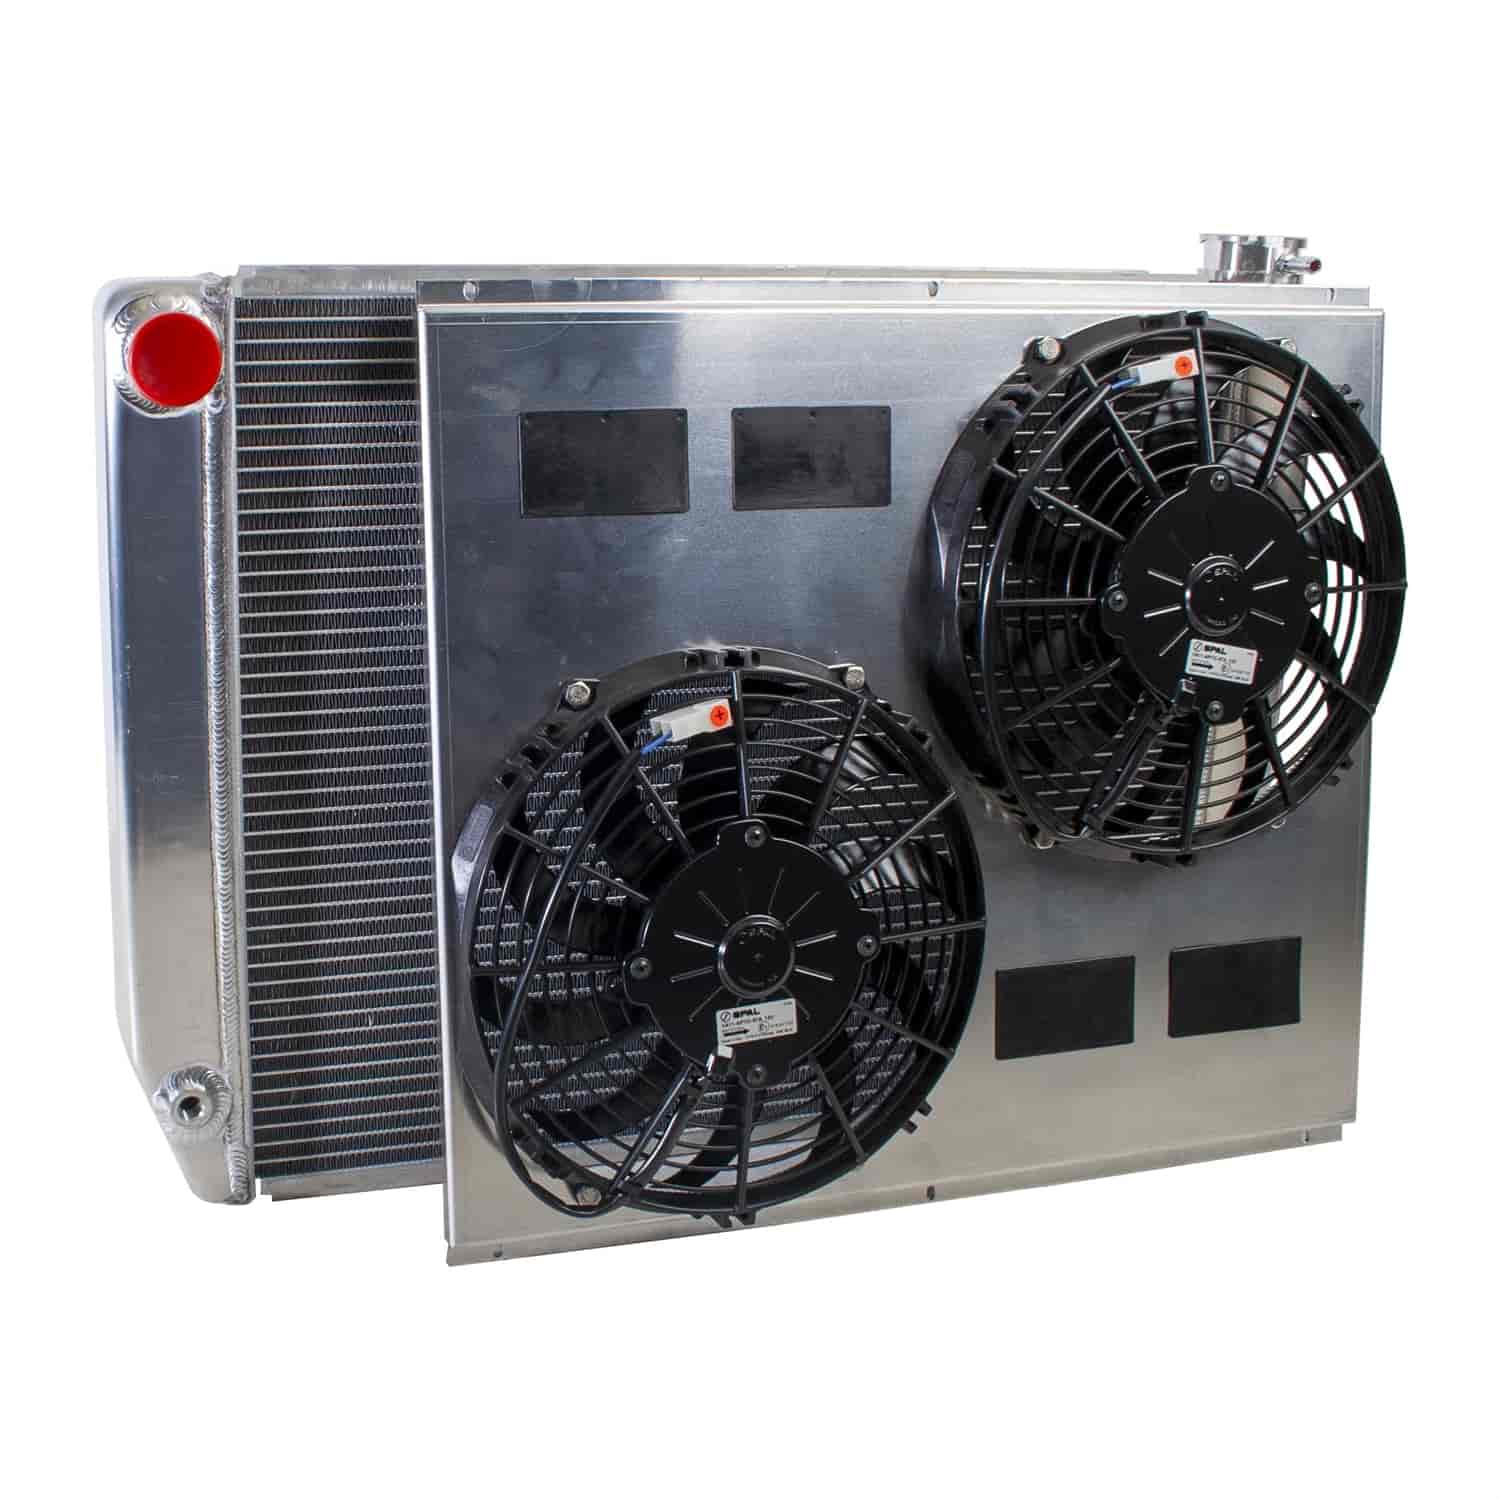 ClassicCool ComboUnit Universal Fit Radiator and Fan Single Pass Crossflow Design 26" x 19" with No Options